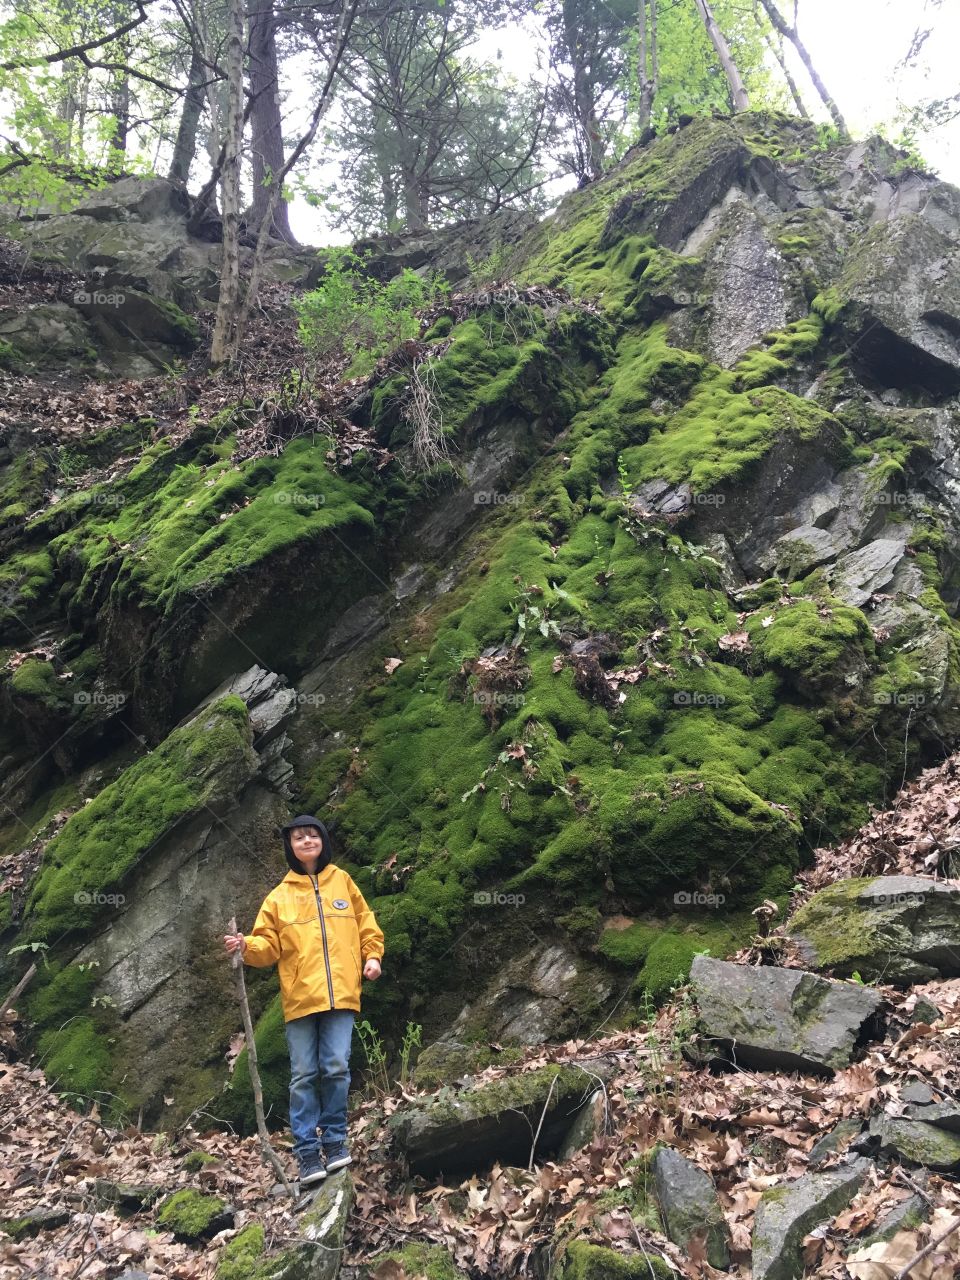 Hiking and saw this cool wall of mossy rock